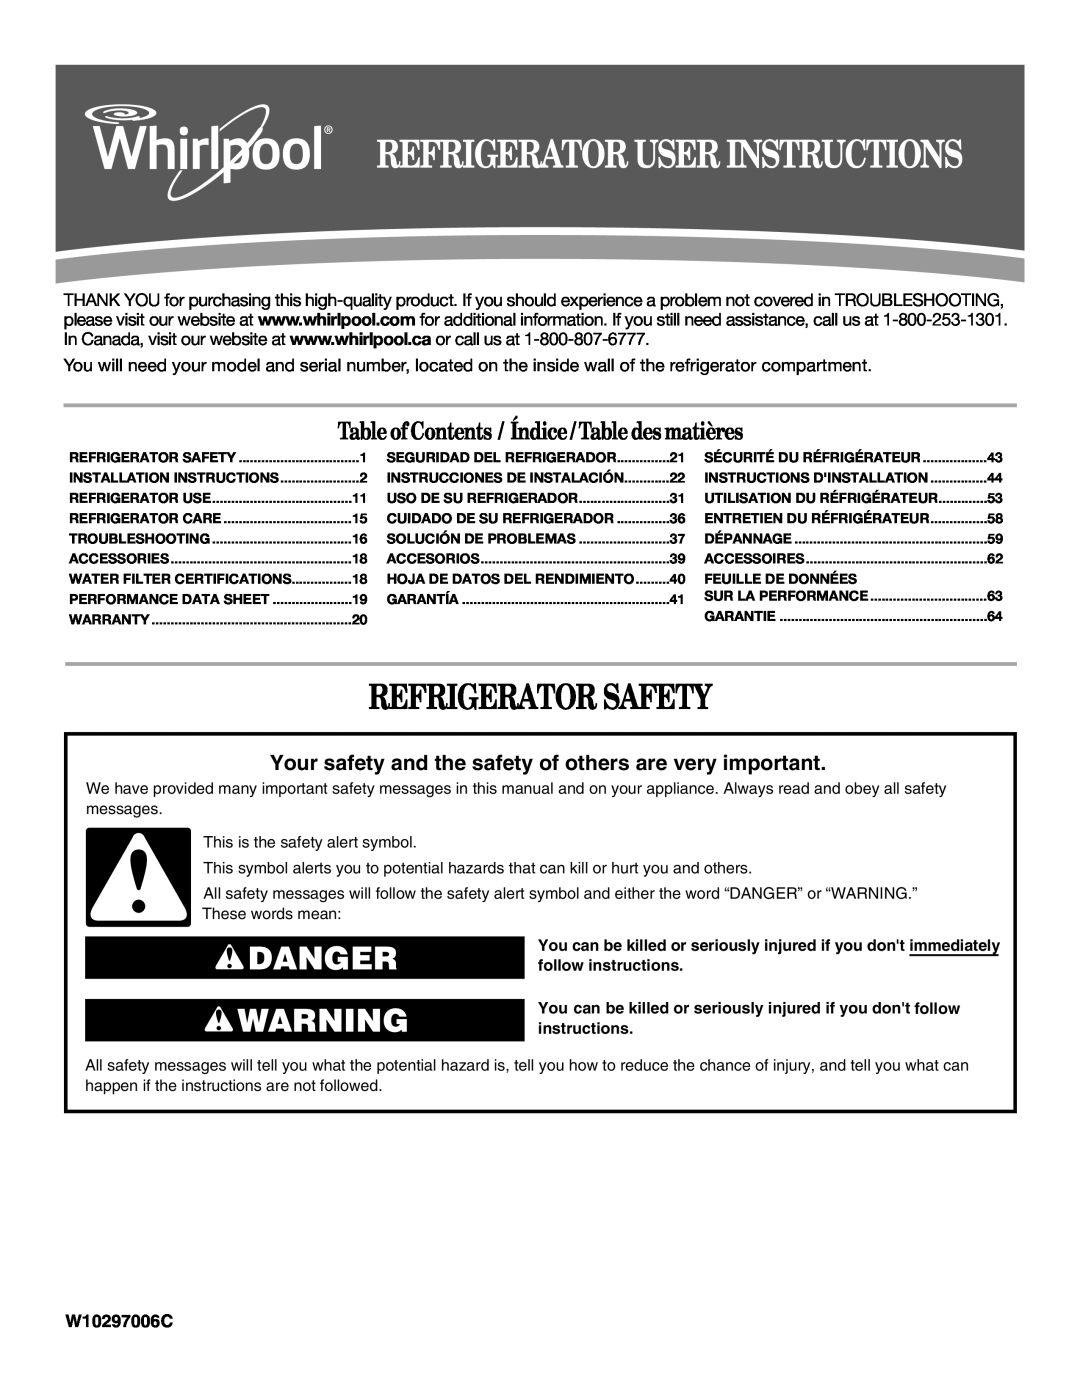 Whirlpool GSF26C4EXT manual Refrigerator Safety, Danger, Table ofContents / Índice / Table des matières, W10297006C 